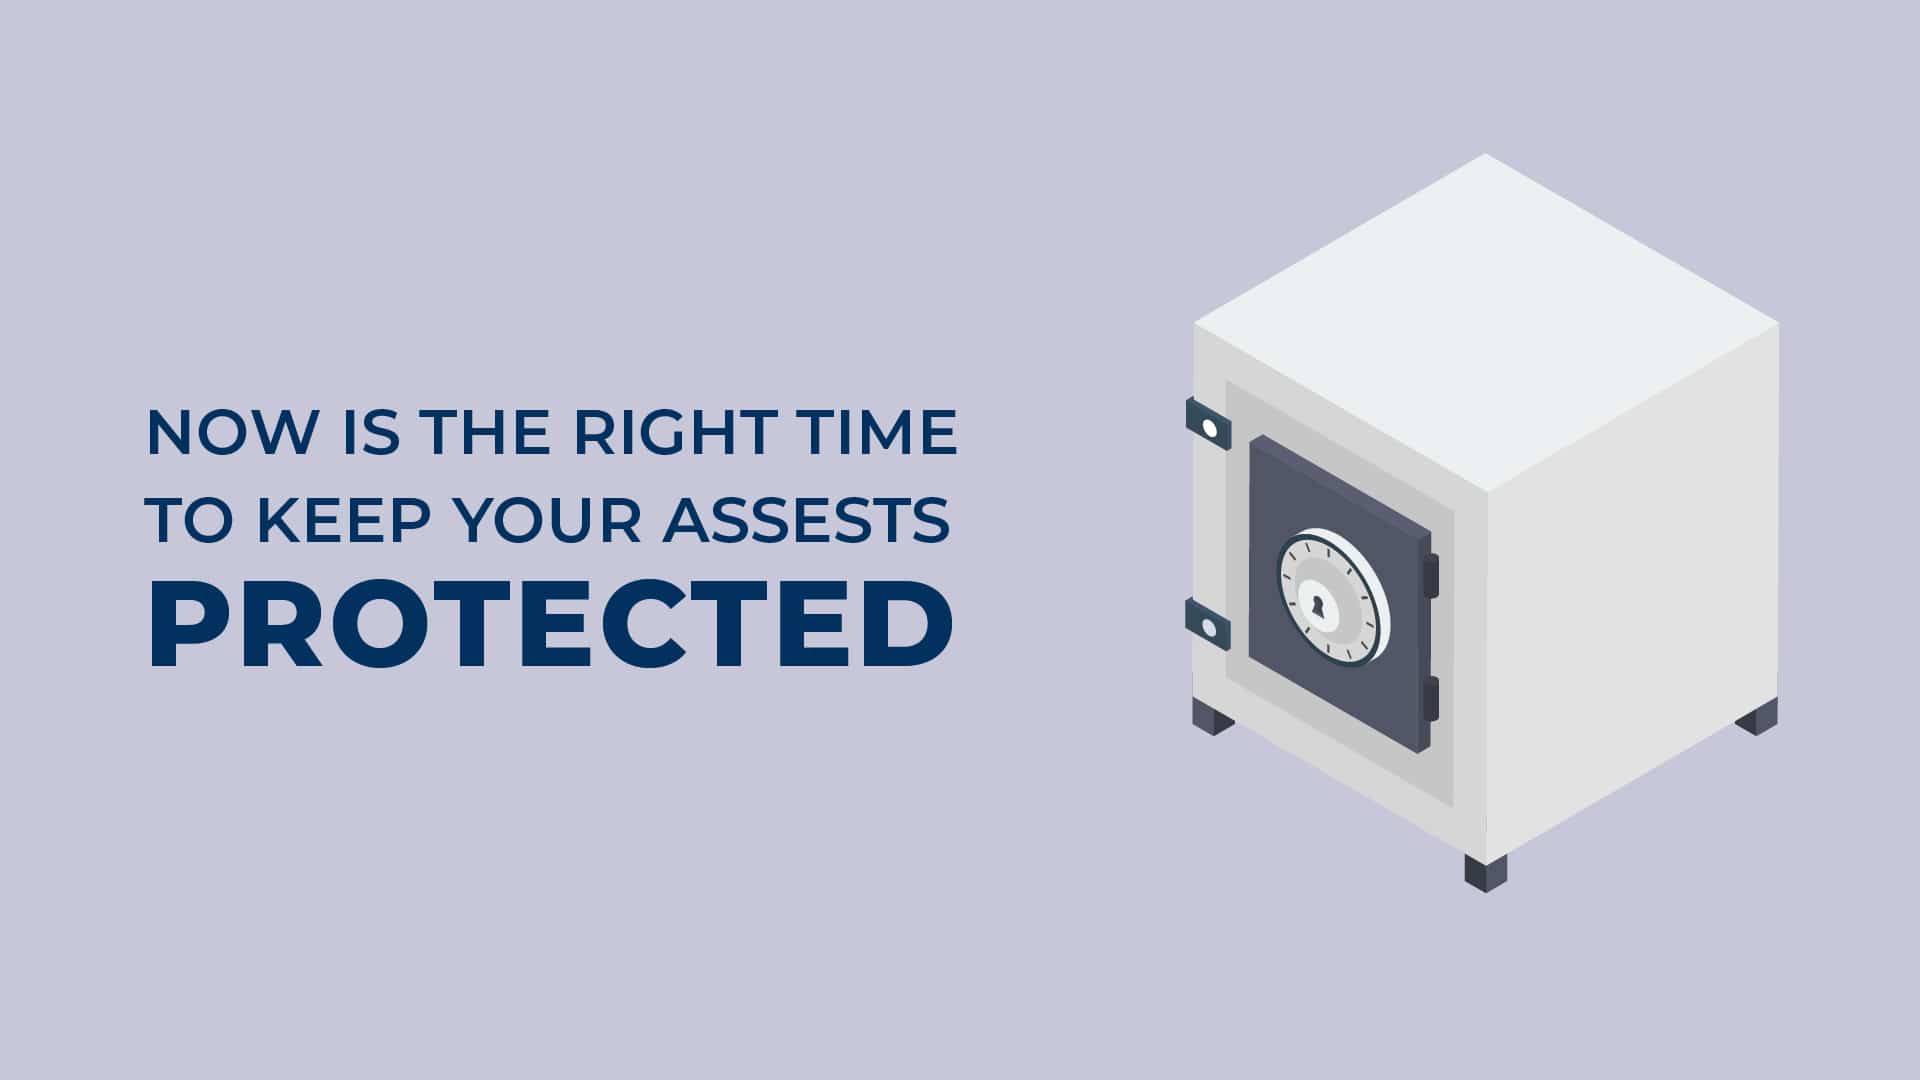 Now is the time to protect your assets